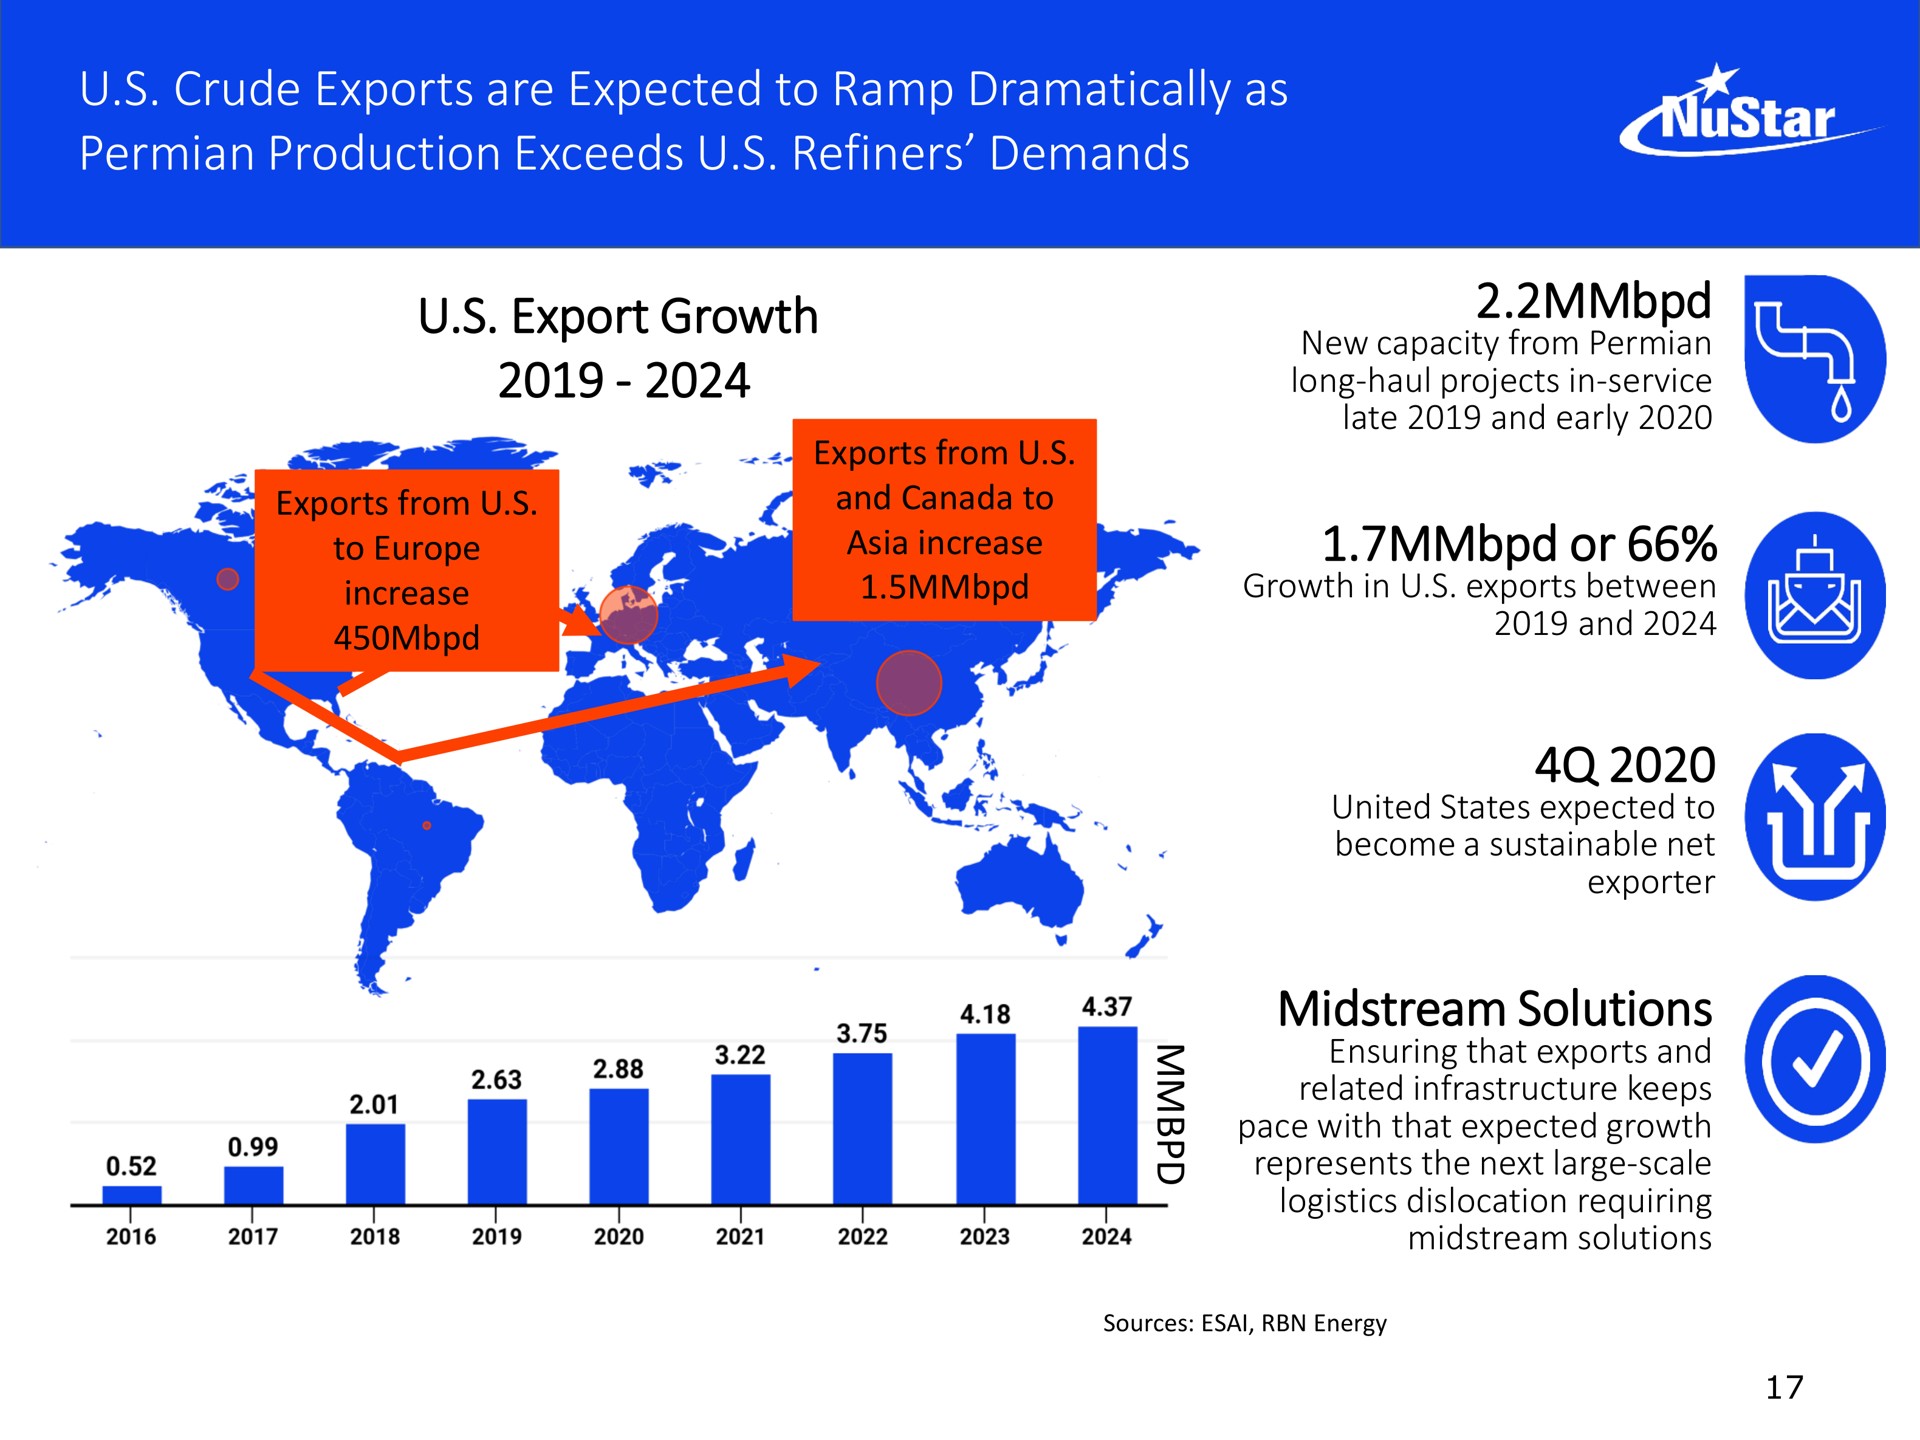 crude exports are expected to ramp dramatically as production exceeds refiners demands export growth or midstream solutions | NuStar Energy